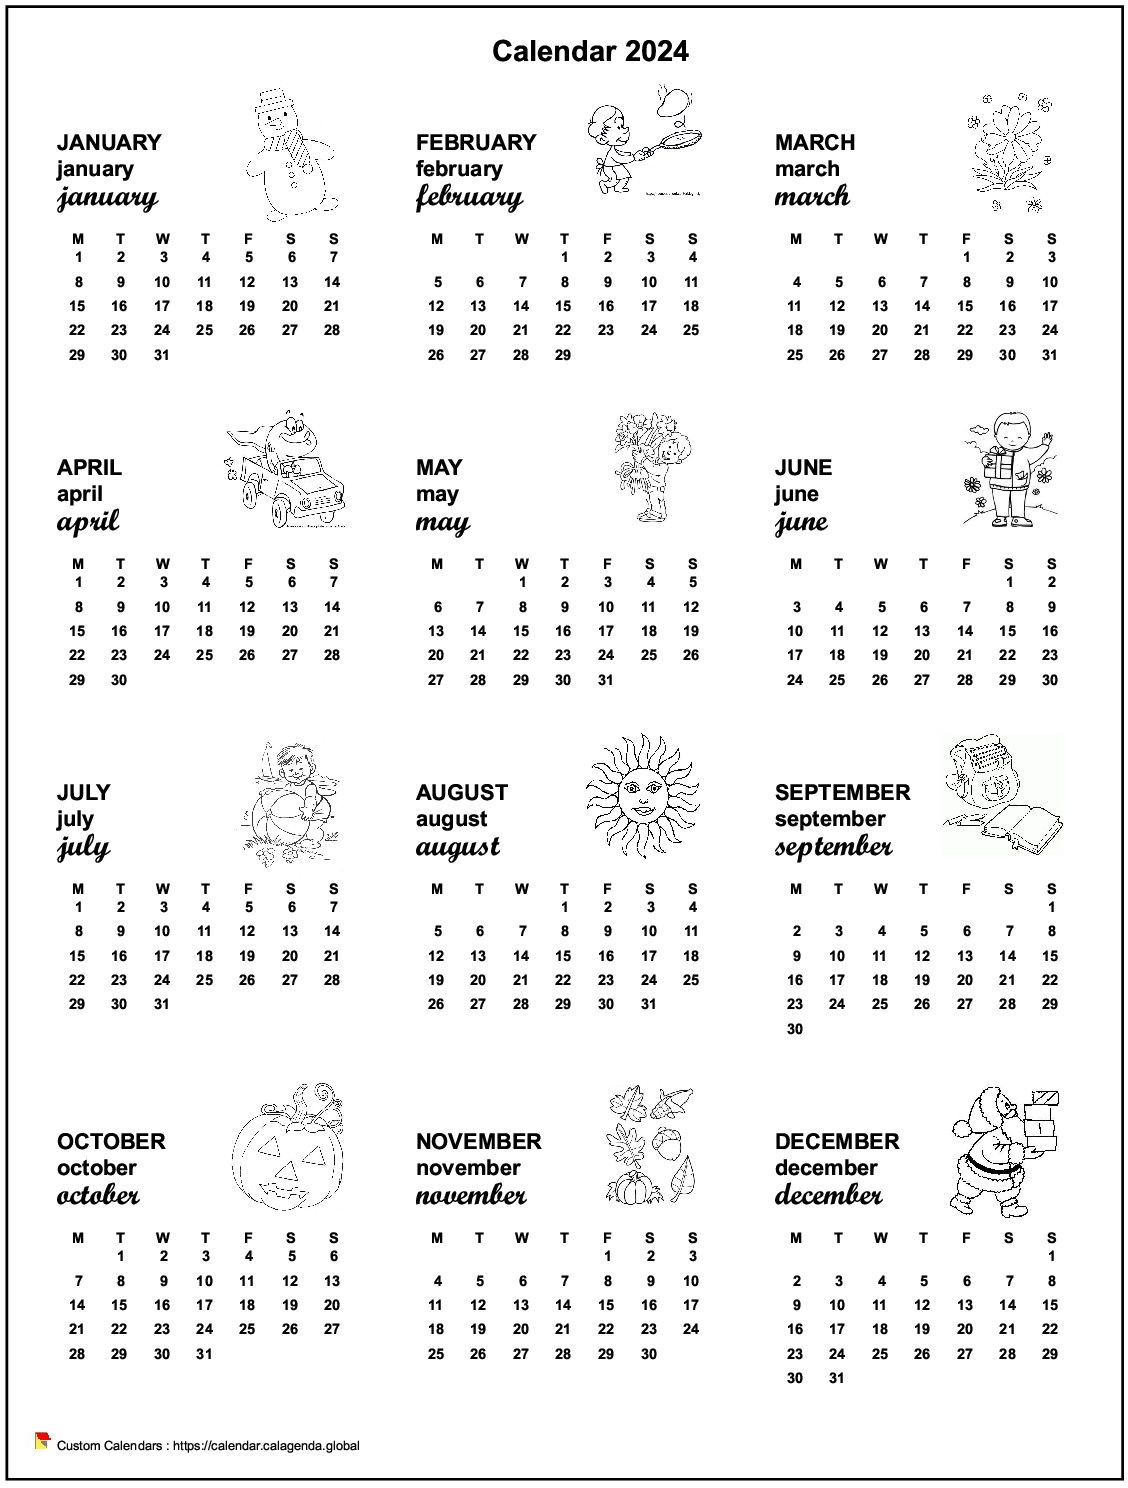 Calendar 2084 annual maternal and primary school